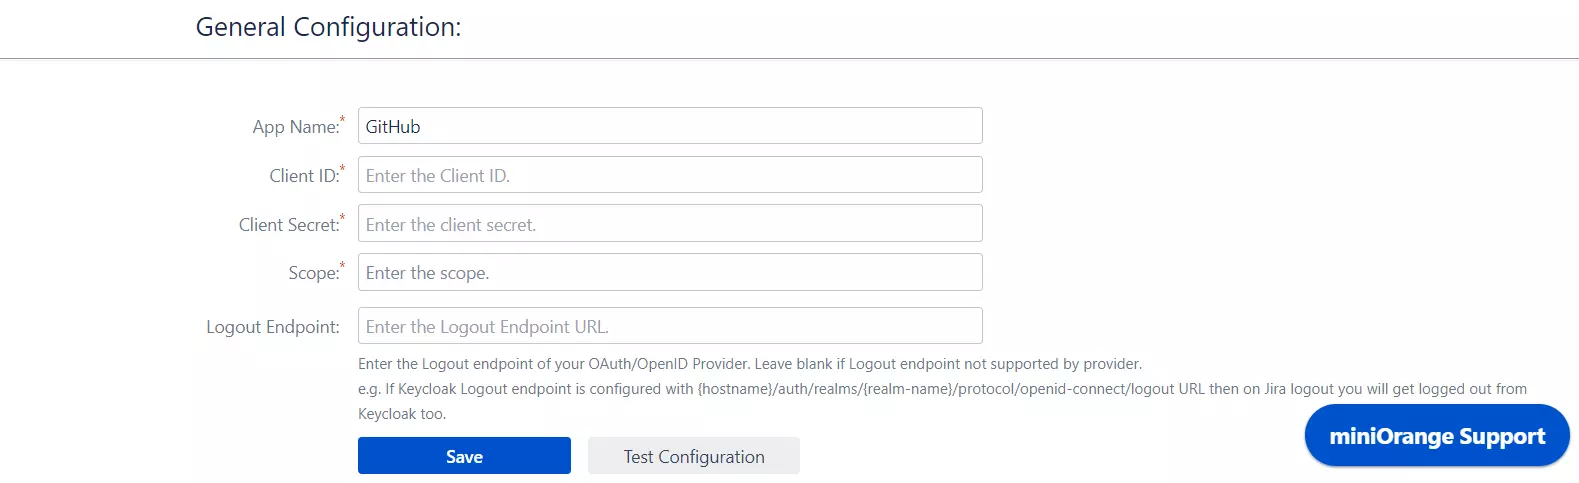 OAuth / OpenID Single Sign On (SSO) using ADFS Identity Provider, Configure OAuth